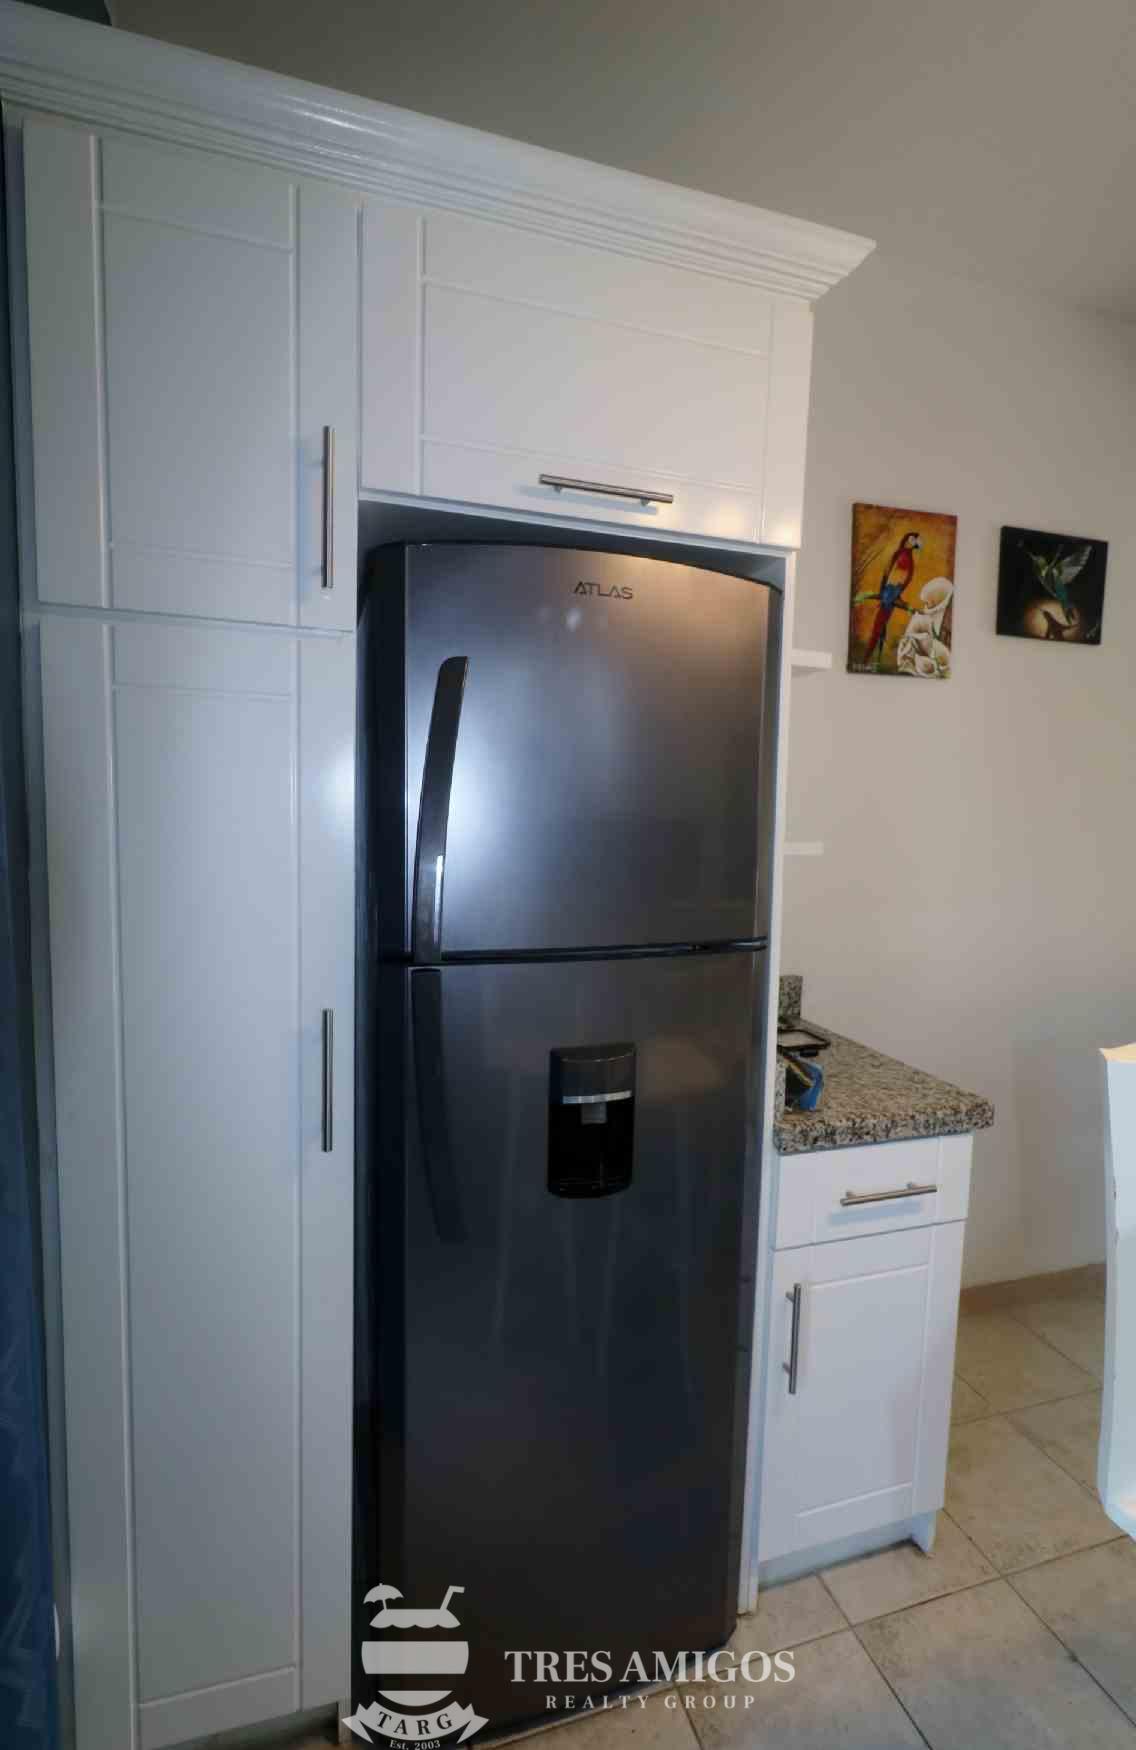 Refrigerator and Wooden Cabinet